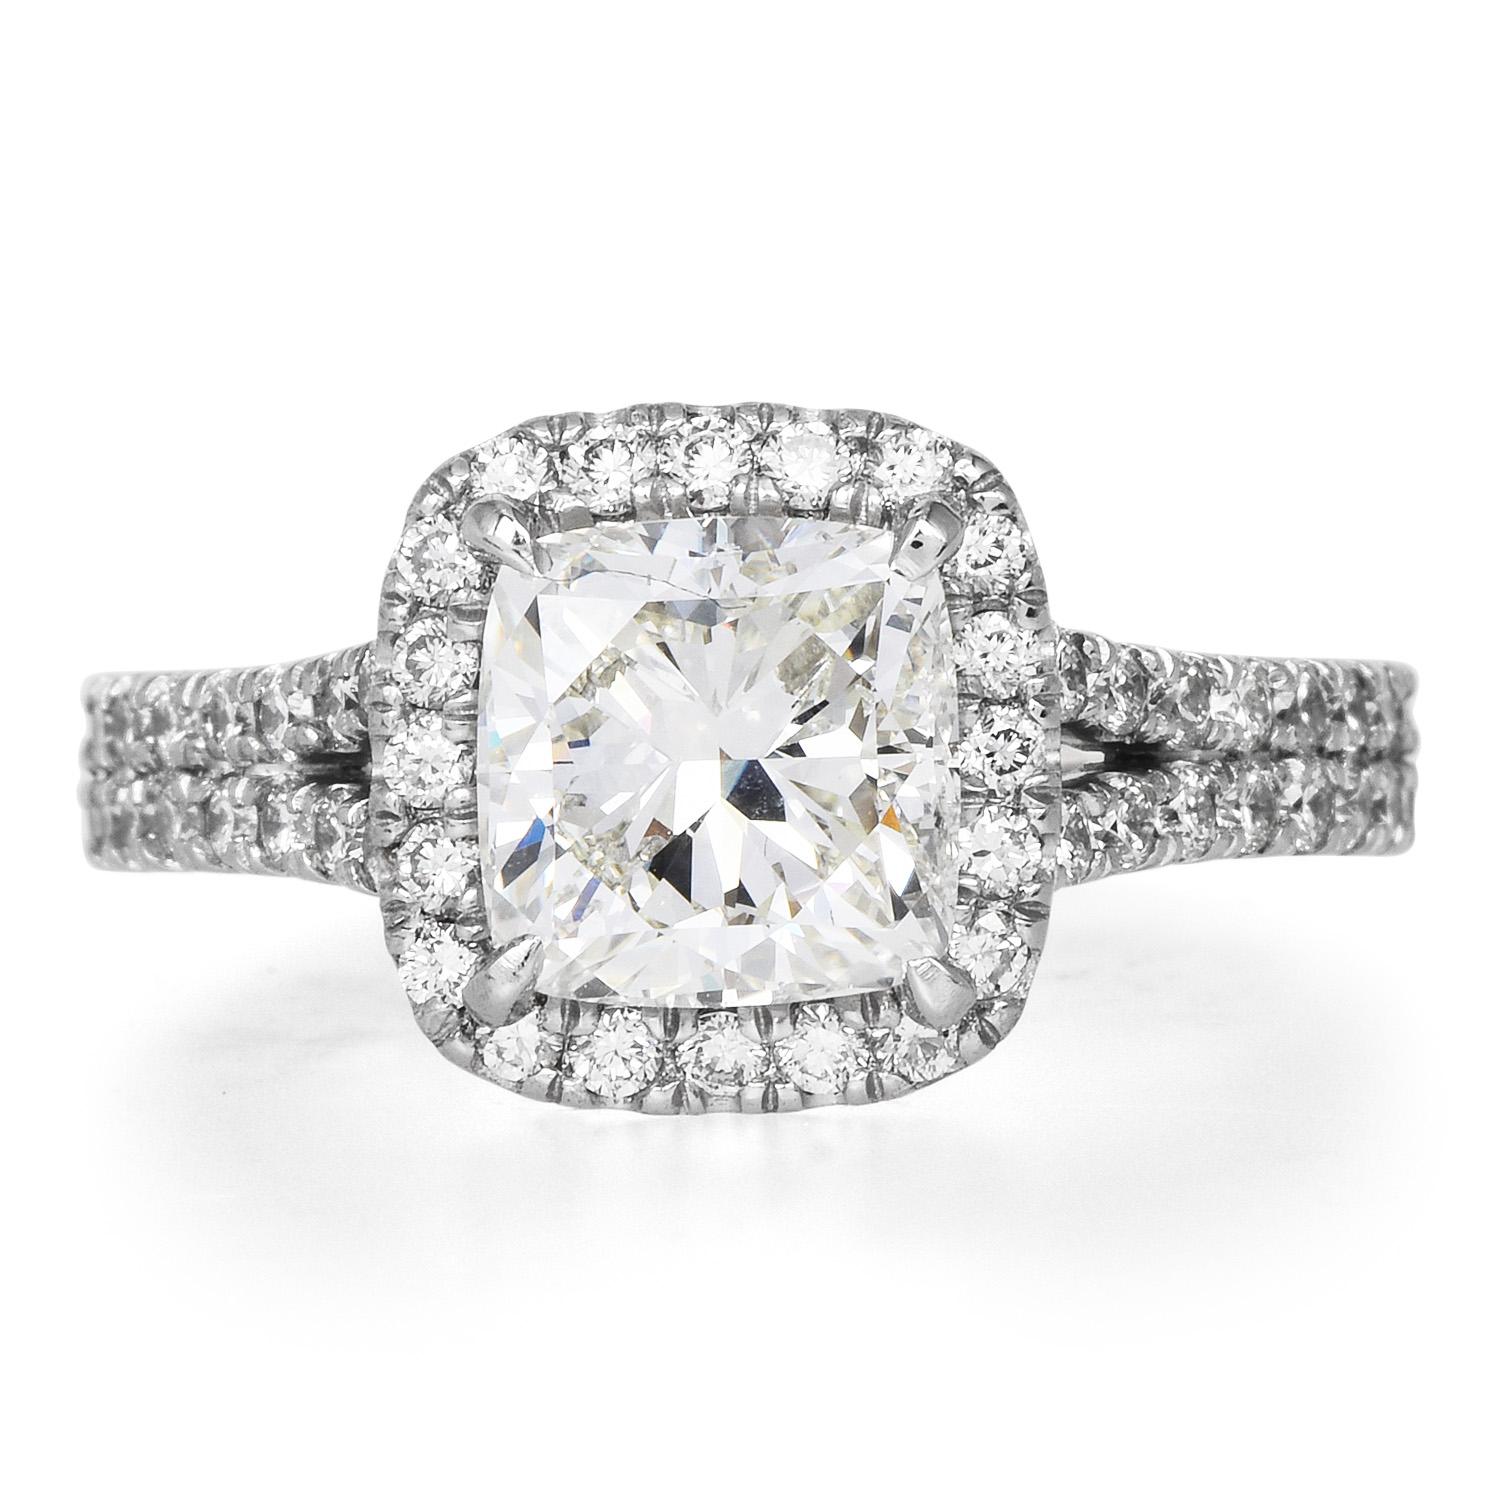 Elegant and Highly Sparkly Engagement Ring.

Inspired by ta halo style, is the perfect piece for that special person. 

Crafted in solid Platinum, the center is adorned by an EGL certified 2.02 carat, Cushion modified cut Diamond, H-I color & VS2